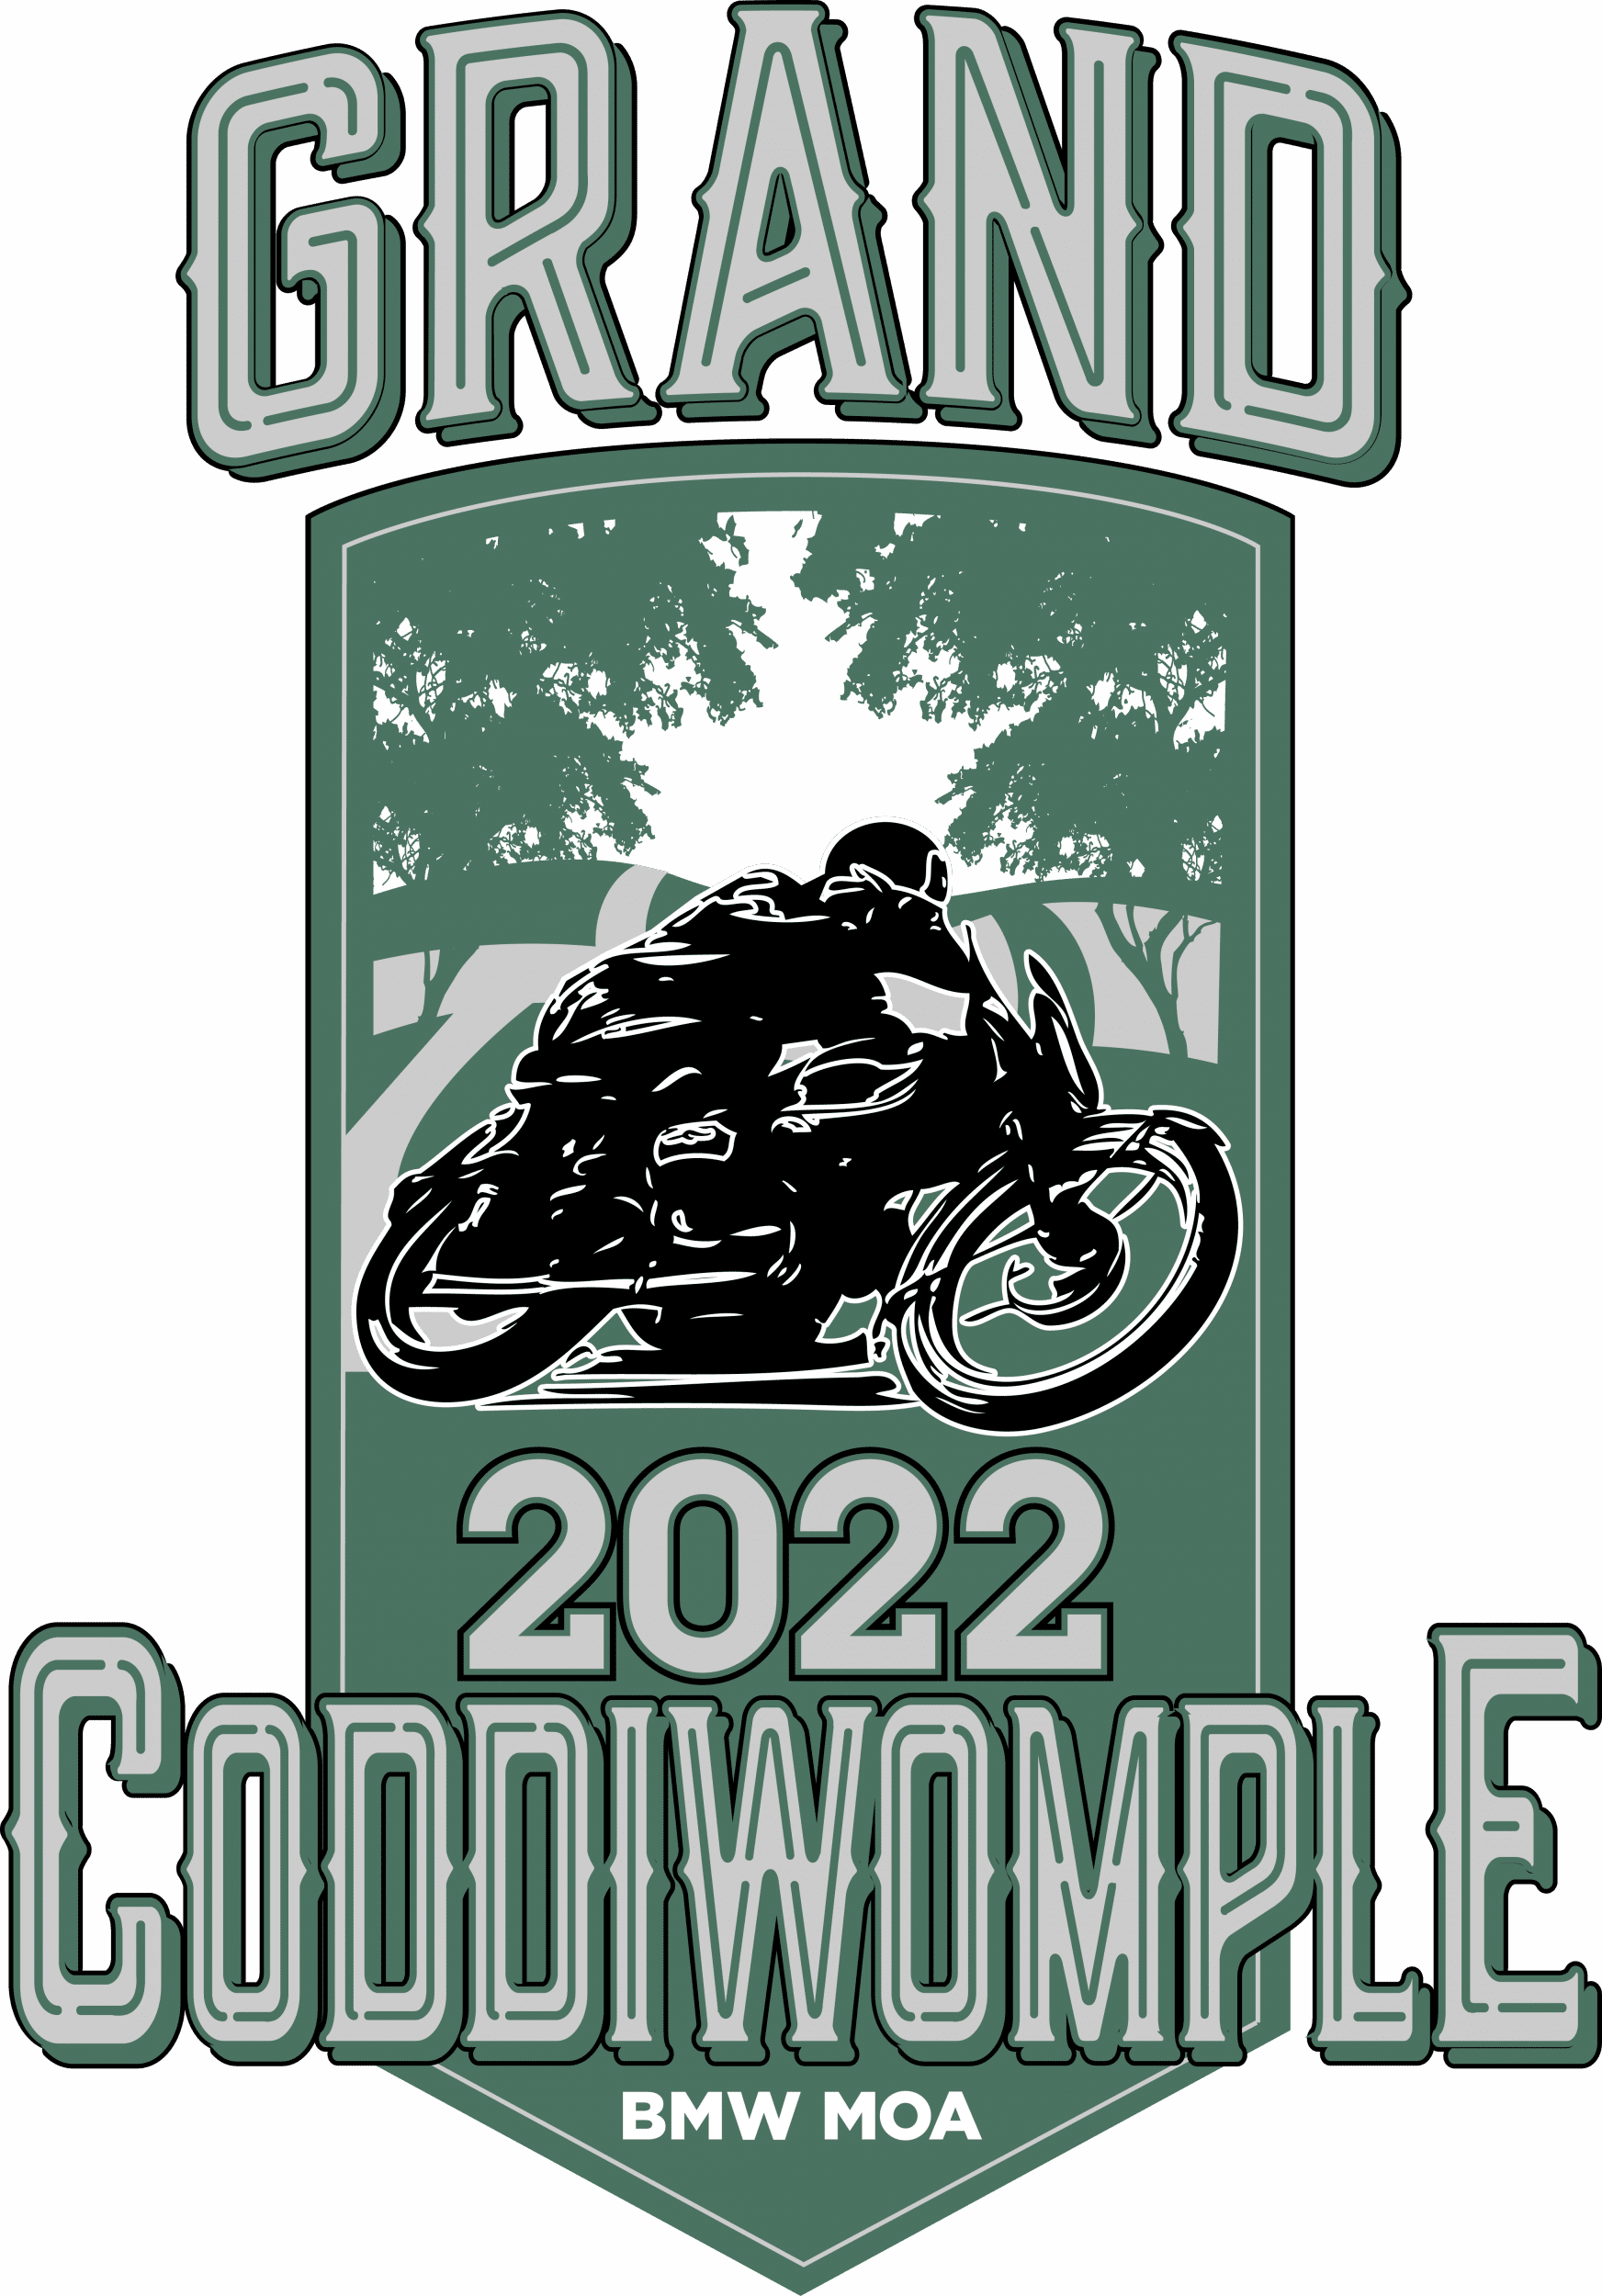 The Coddiwomple is back for 2022!